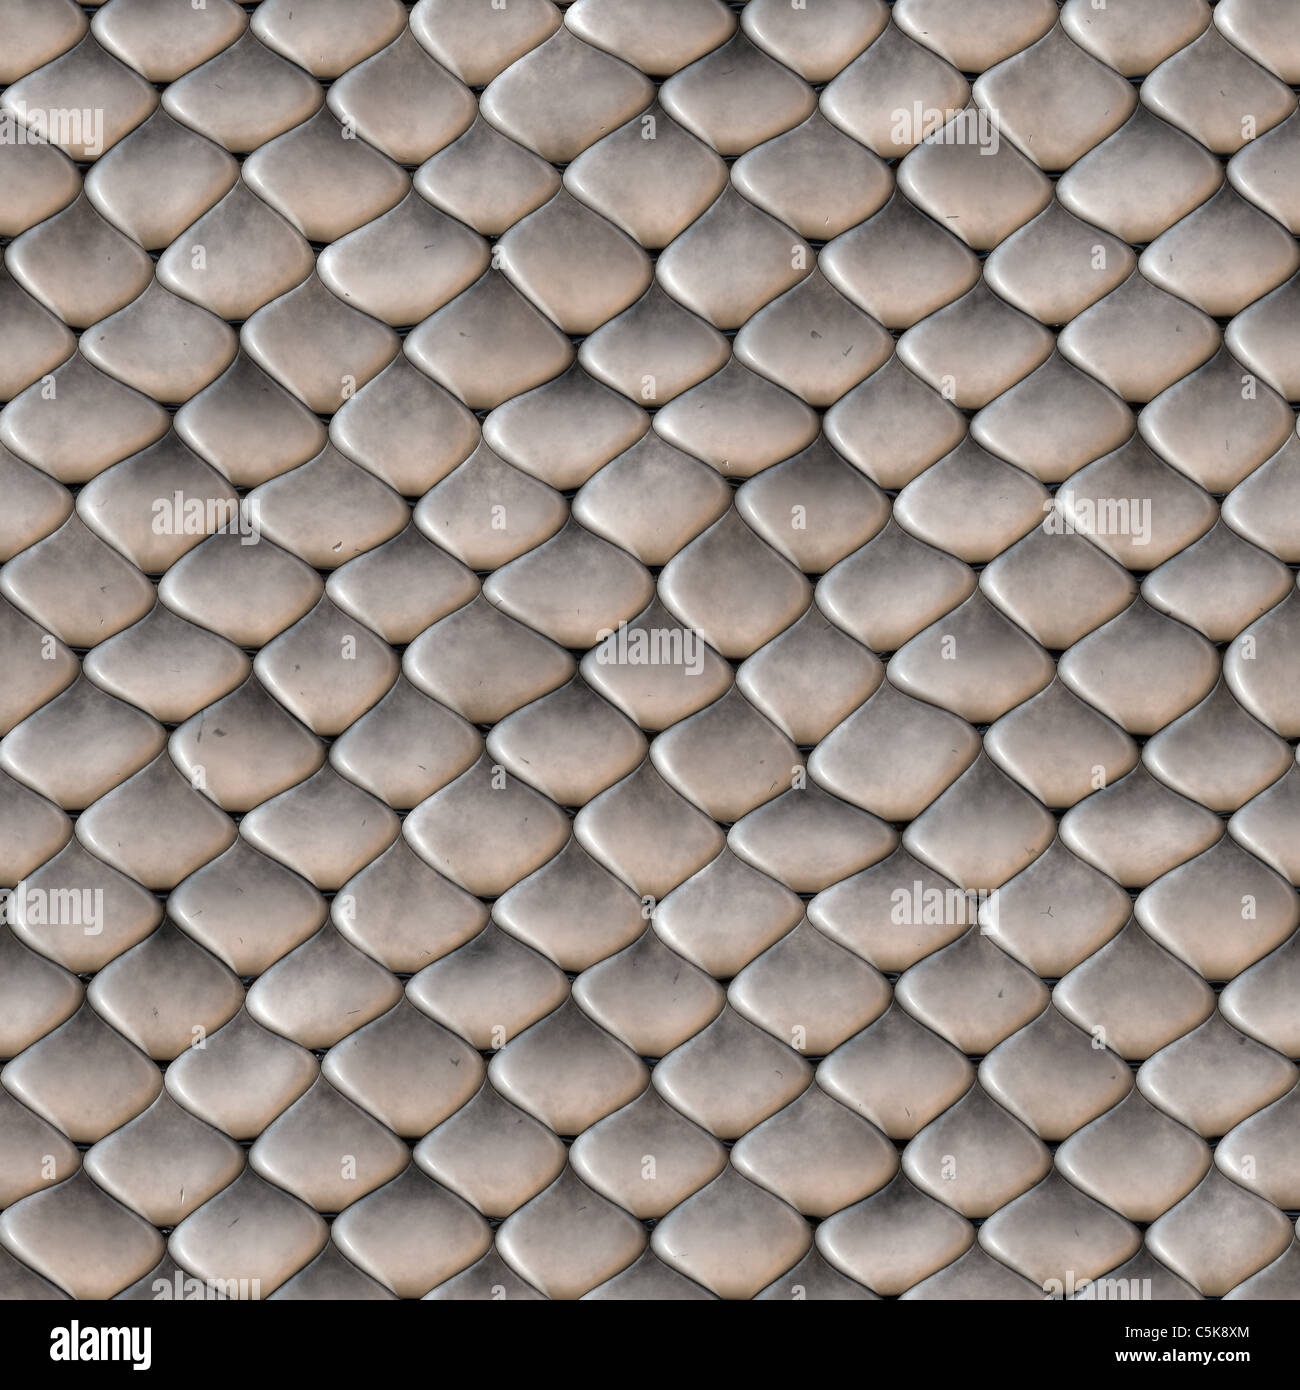 https://c8.alamy.com/comp/C5K8XM/a-scaly-snake-skin-texture-that-tiles-seamlessly-as-a-pattern-in-any-C5K8XM.jpg